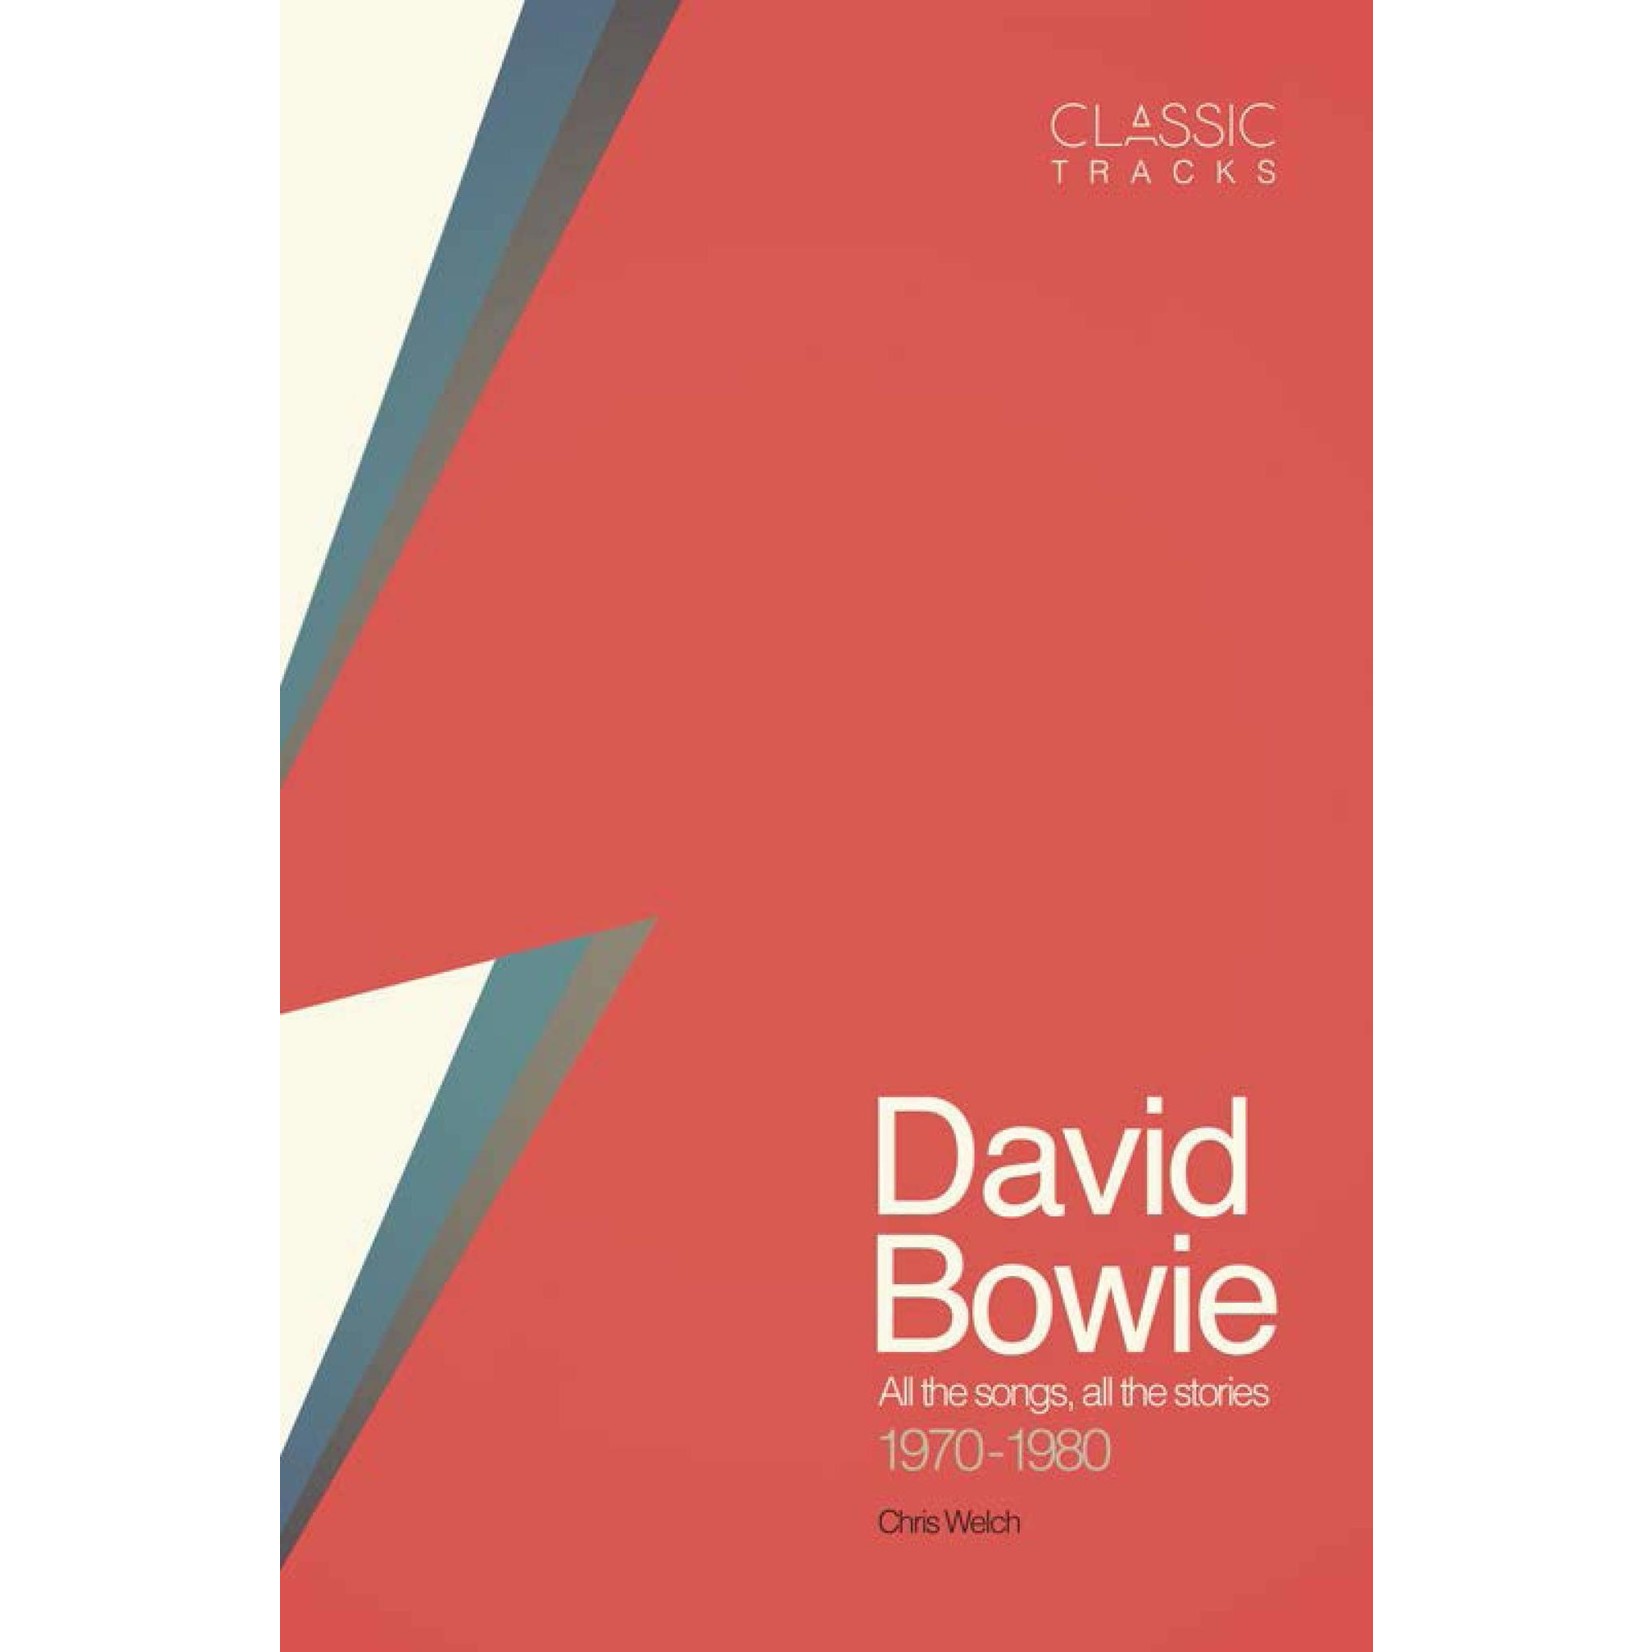 David Bowie - All The Songs, All The Stories 1970-1980 [Book]